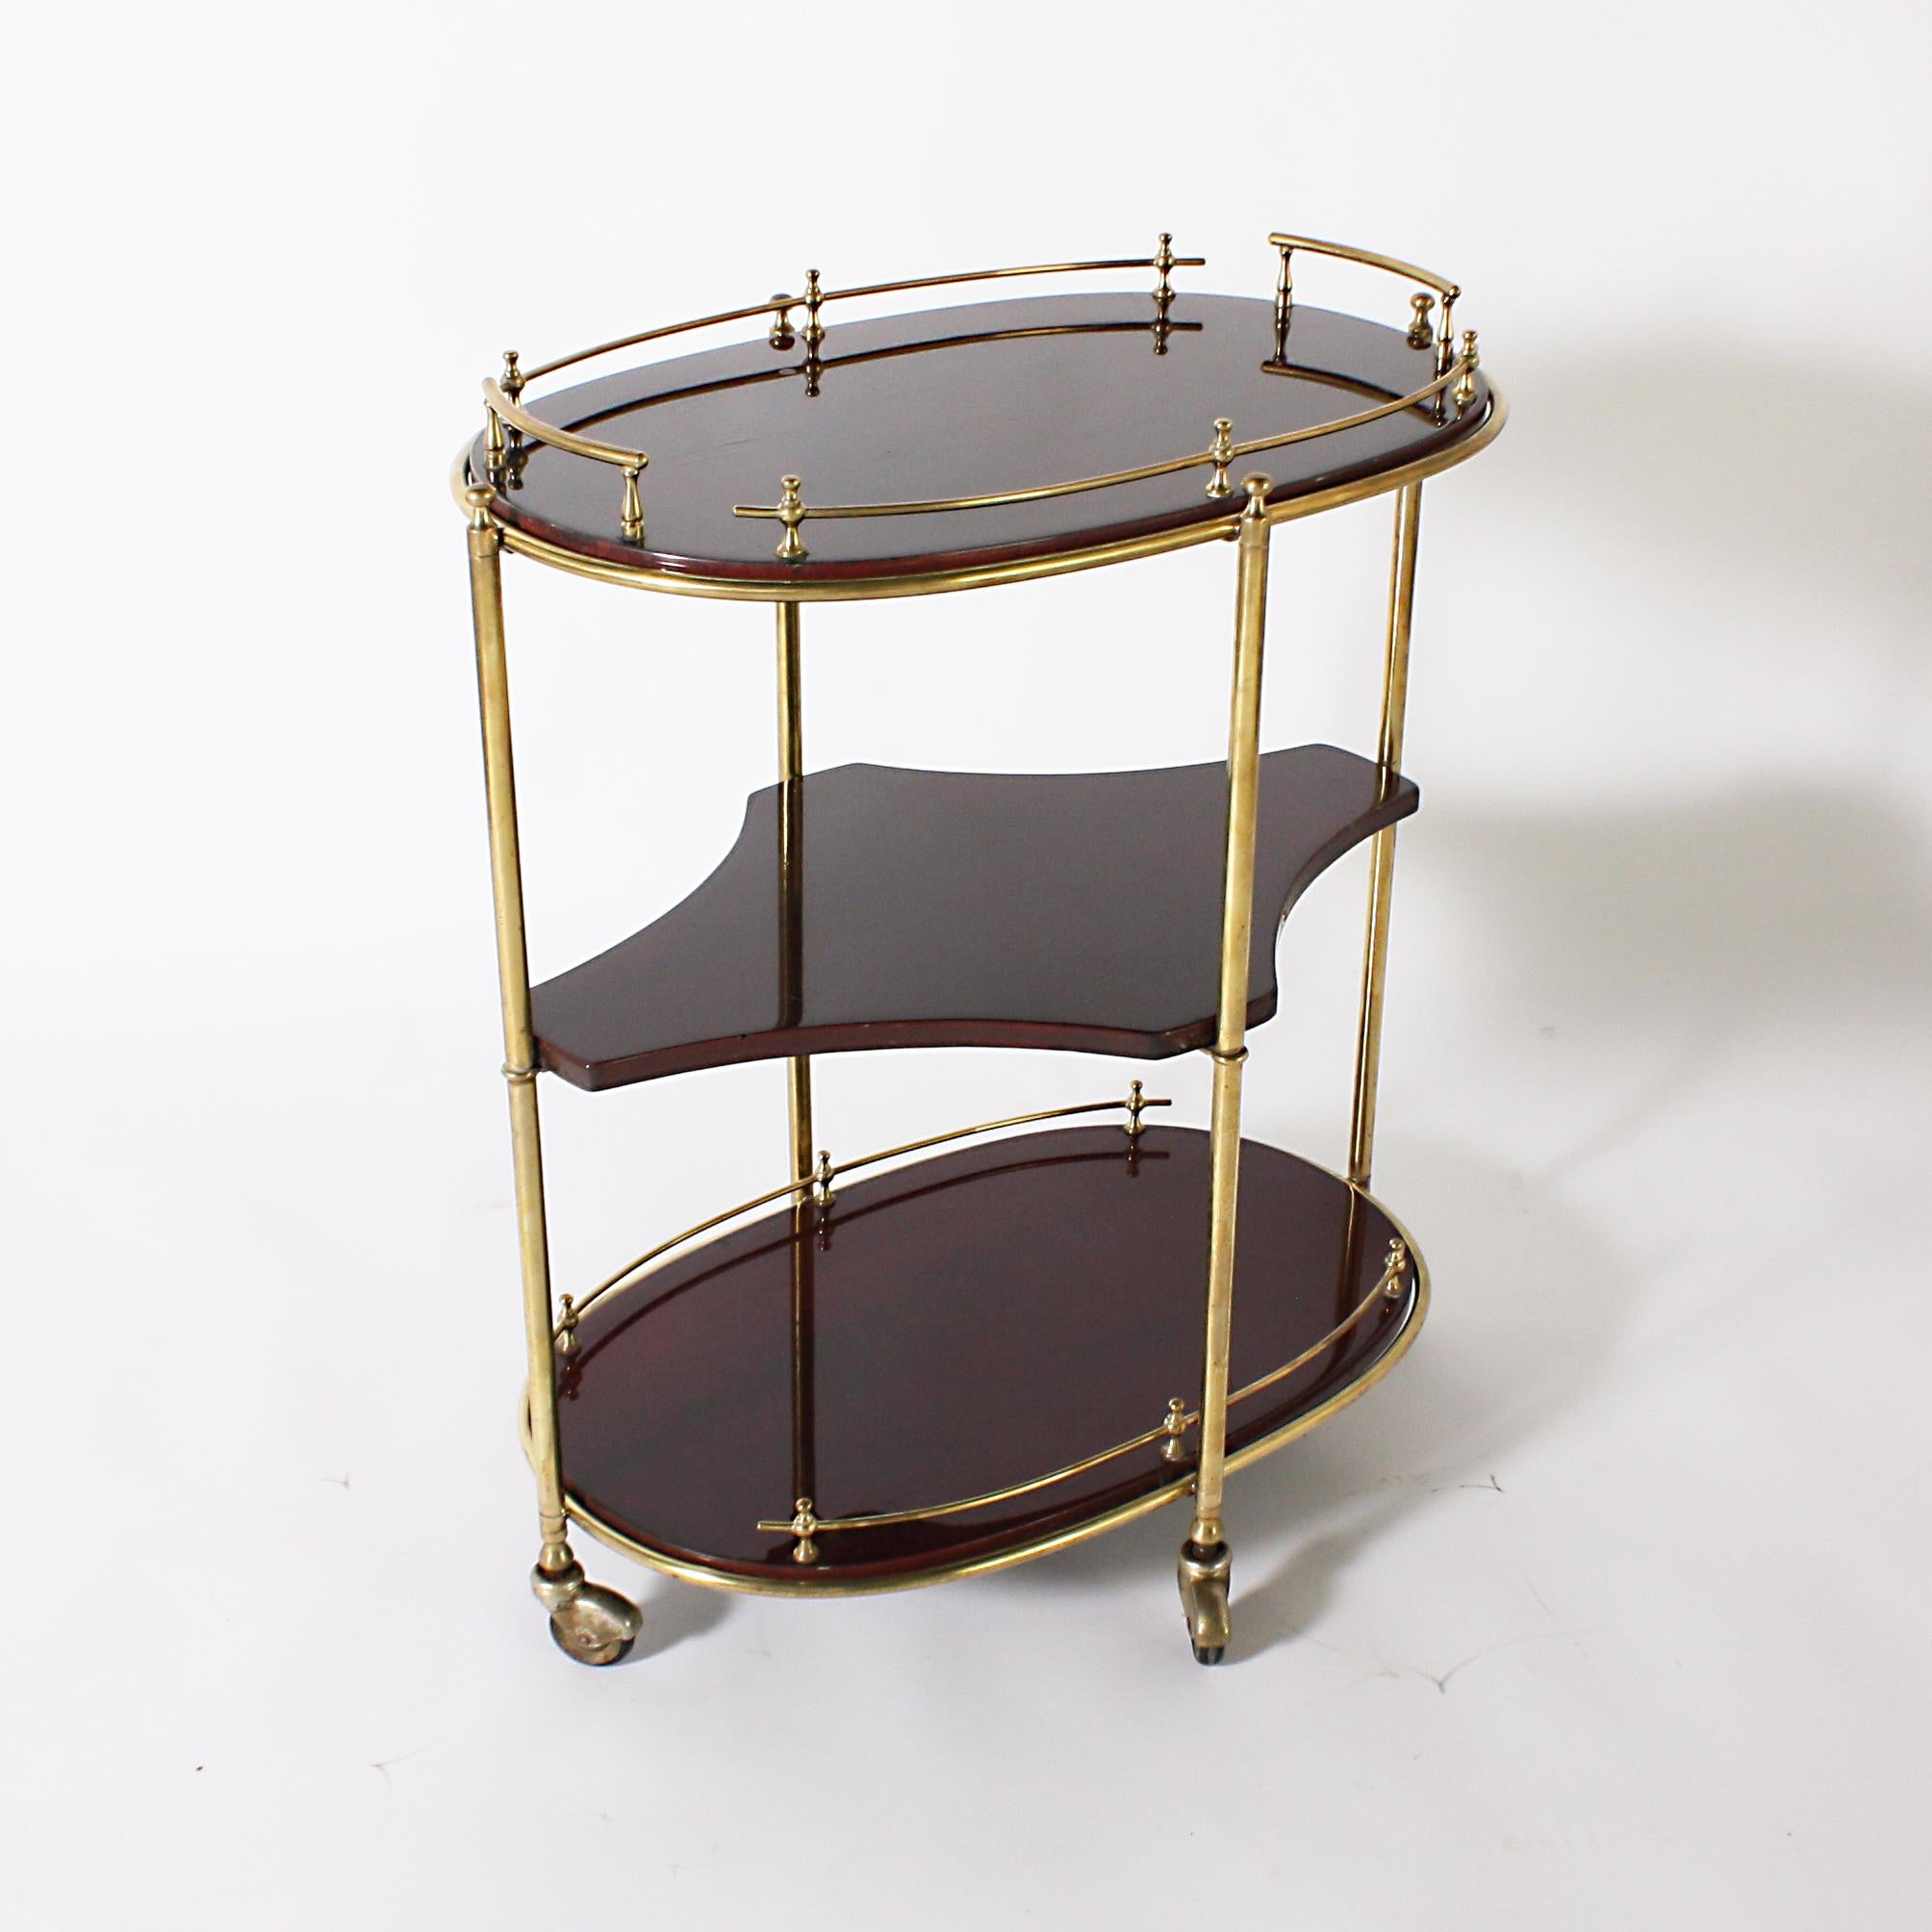 Oval mahogany drinks cart with brass details, circa 1950.
    